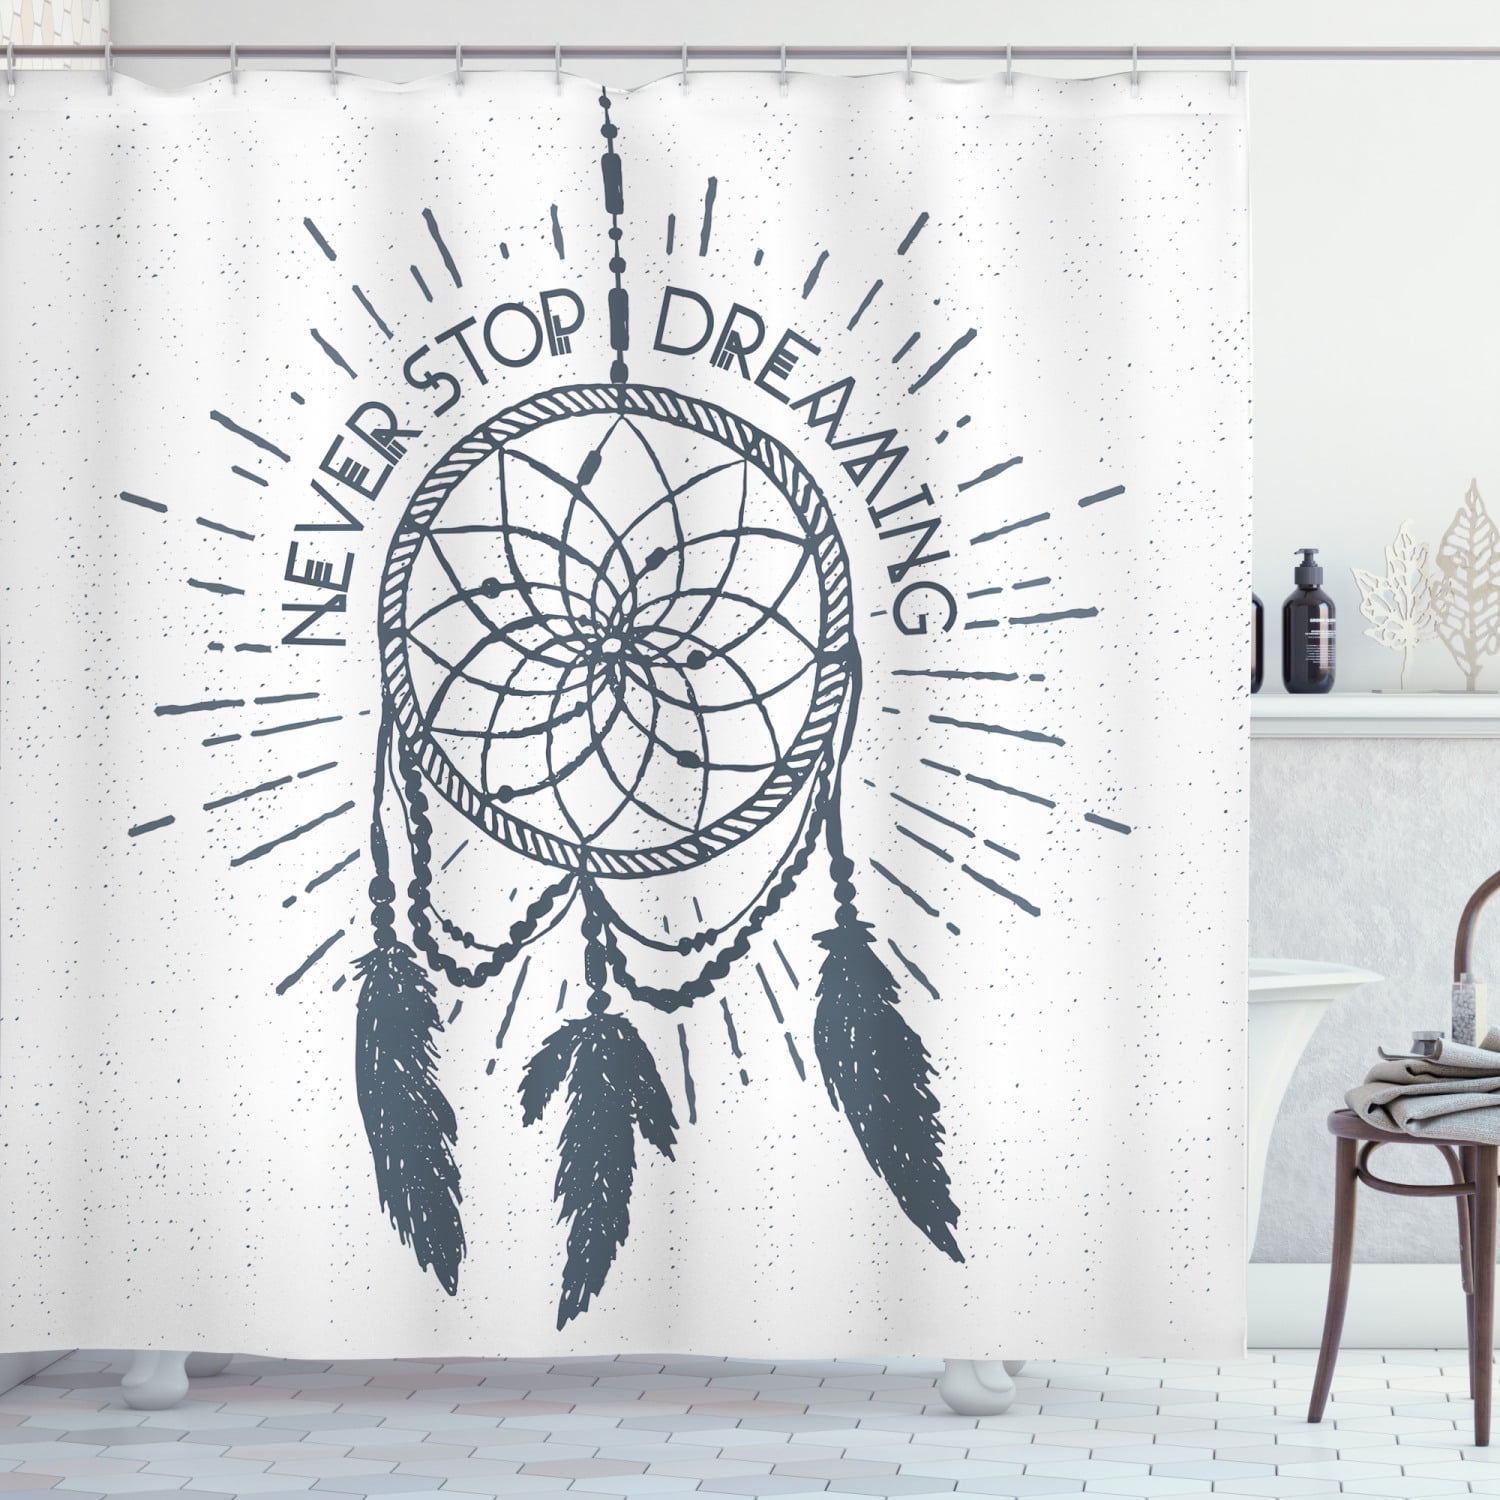 Dreamcatcher Feather Shower Curtain Dream Catcher Boho Chic Style Colorful Theme Fabric Bathroom Decorative Sets with Hooks Waterproof Washable 72 x 72 inches Grey and White